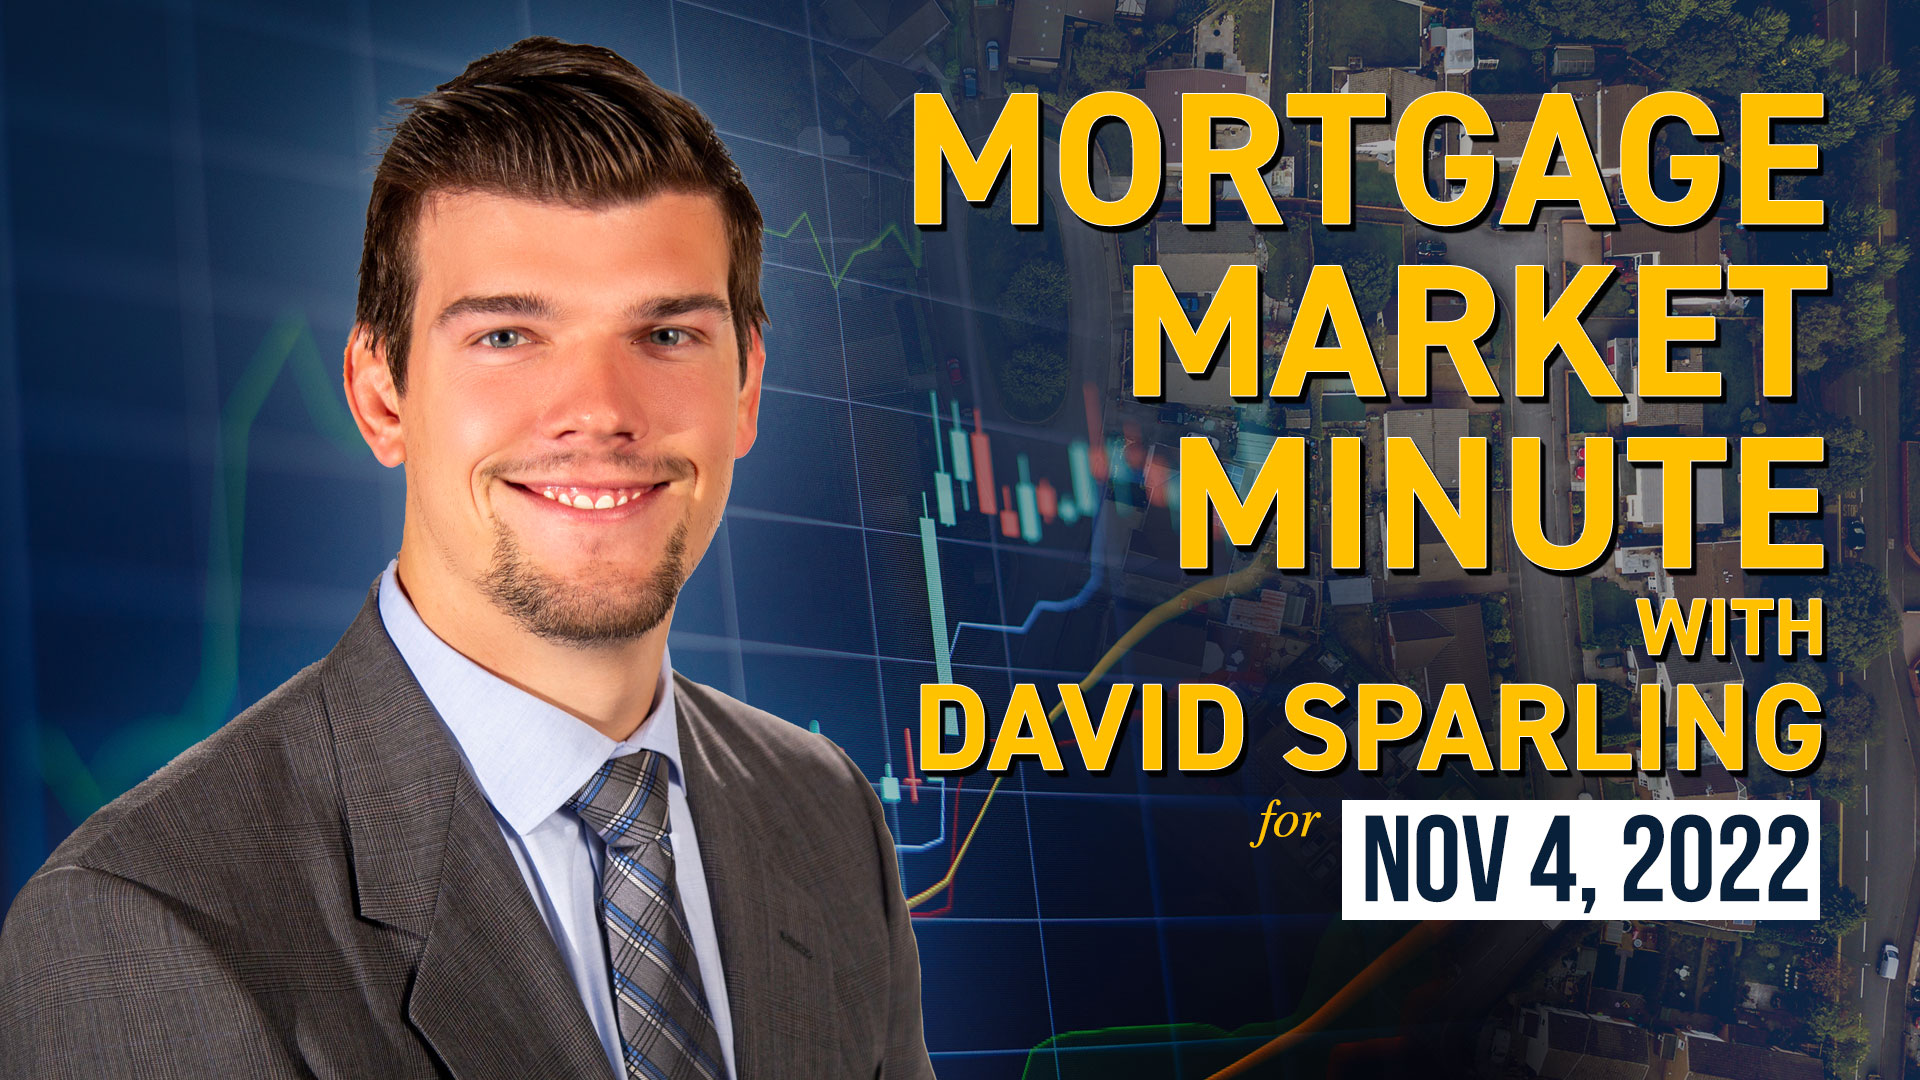 Dave Sparling and the Mortgage Market Minute for Nov 4, 2022